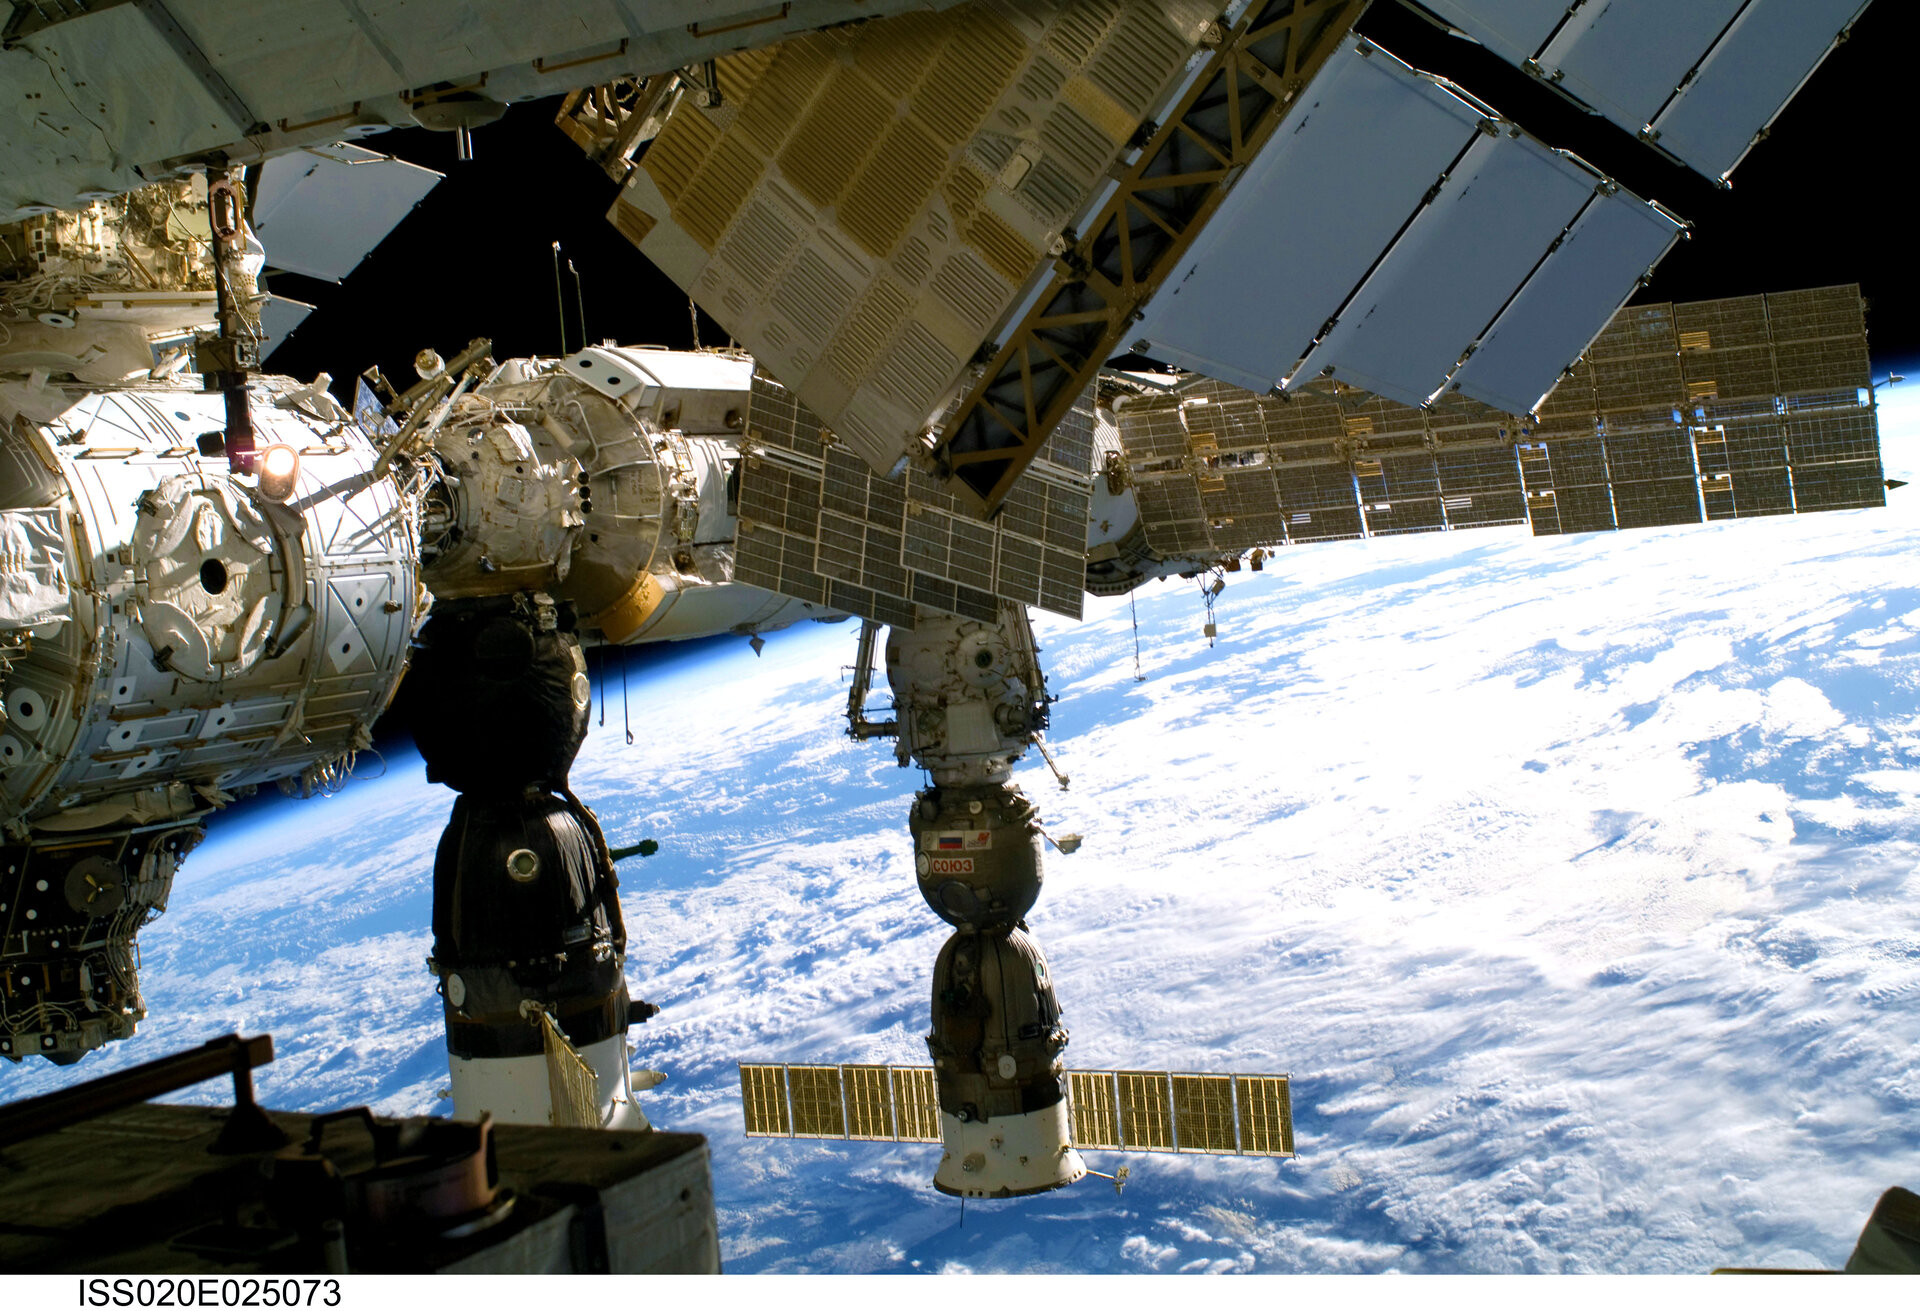 External view of the International Space Station